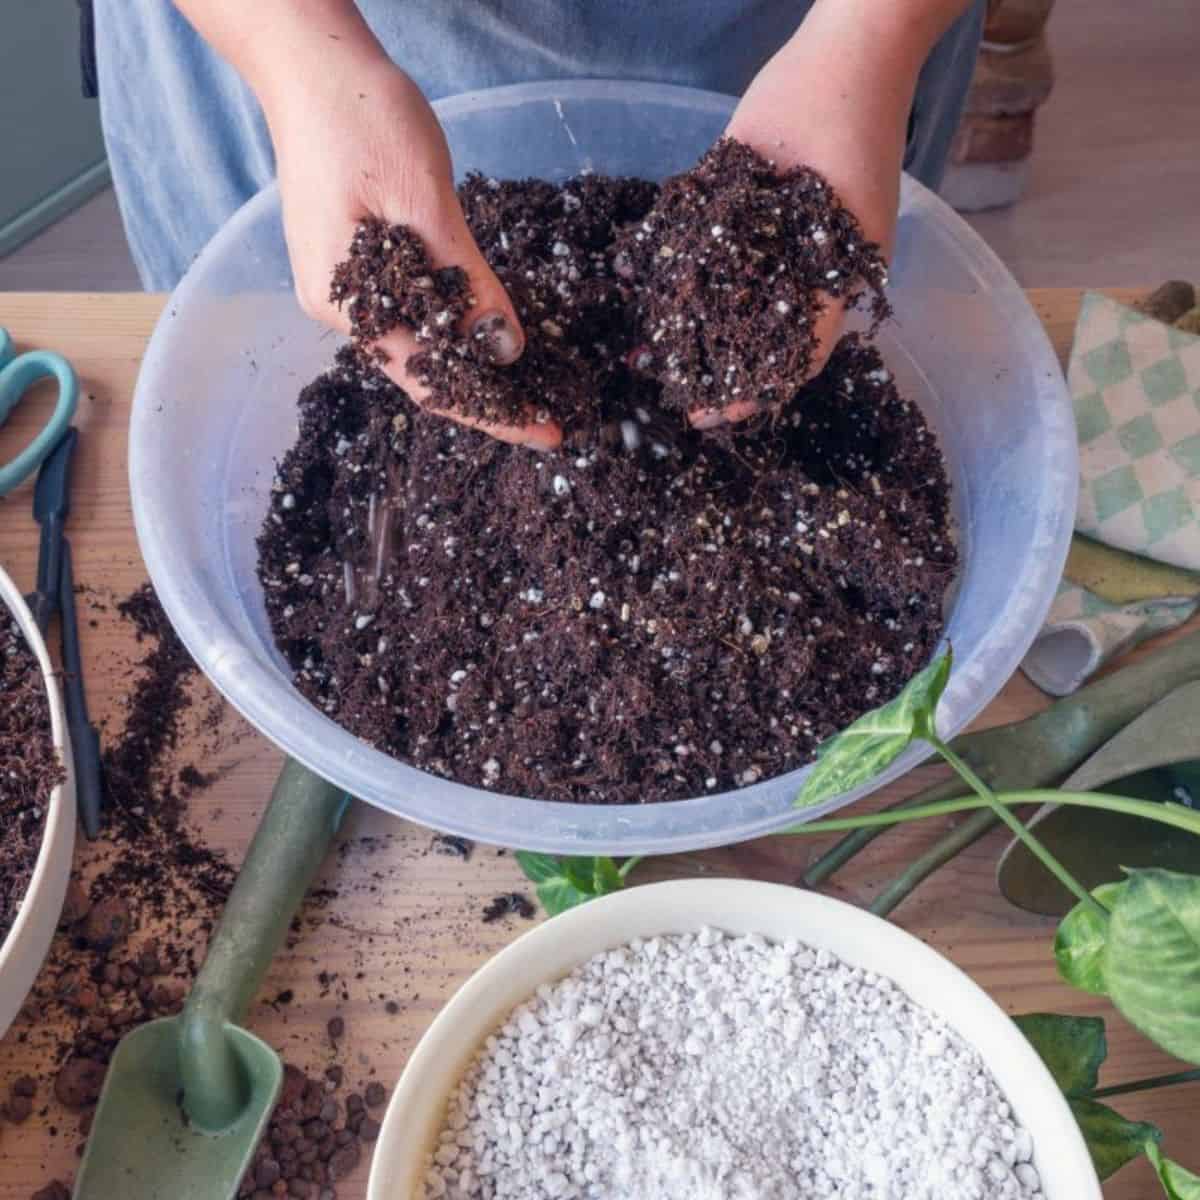 Hands mixing suculent soil in a container.